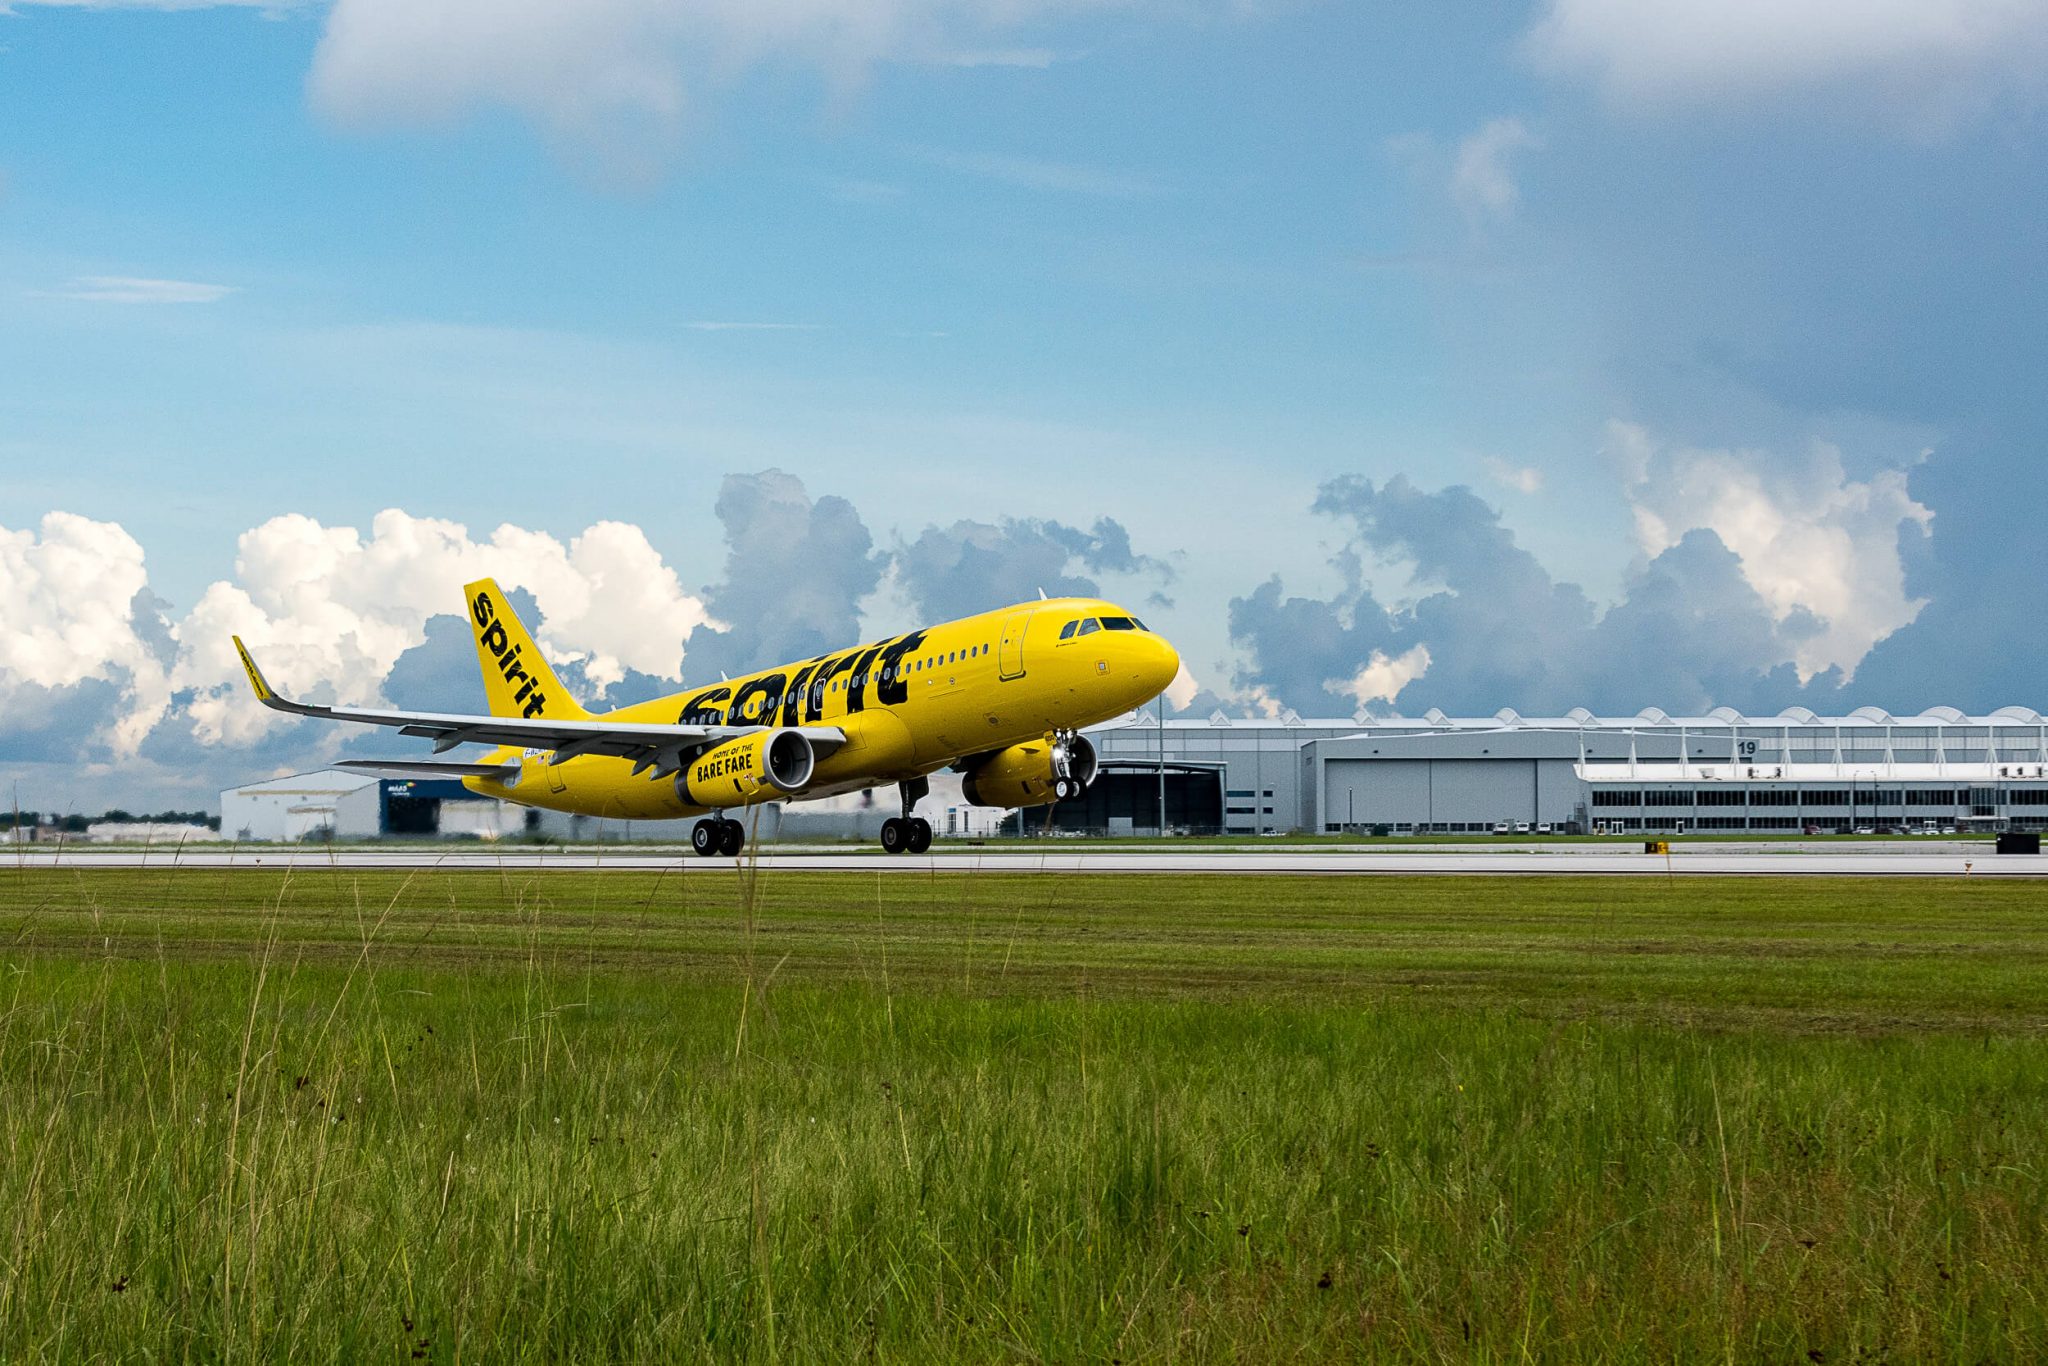 Spirit to acquire up to 100 A320neo aircraft; sees improvement in Q3 2019